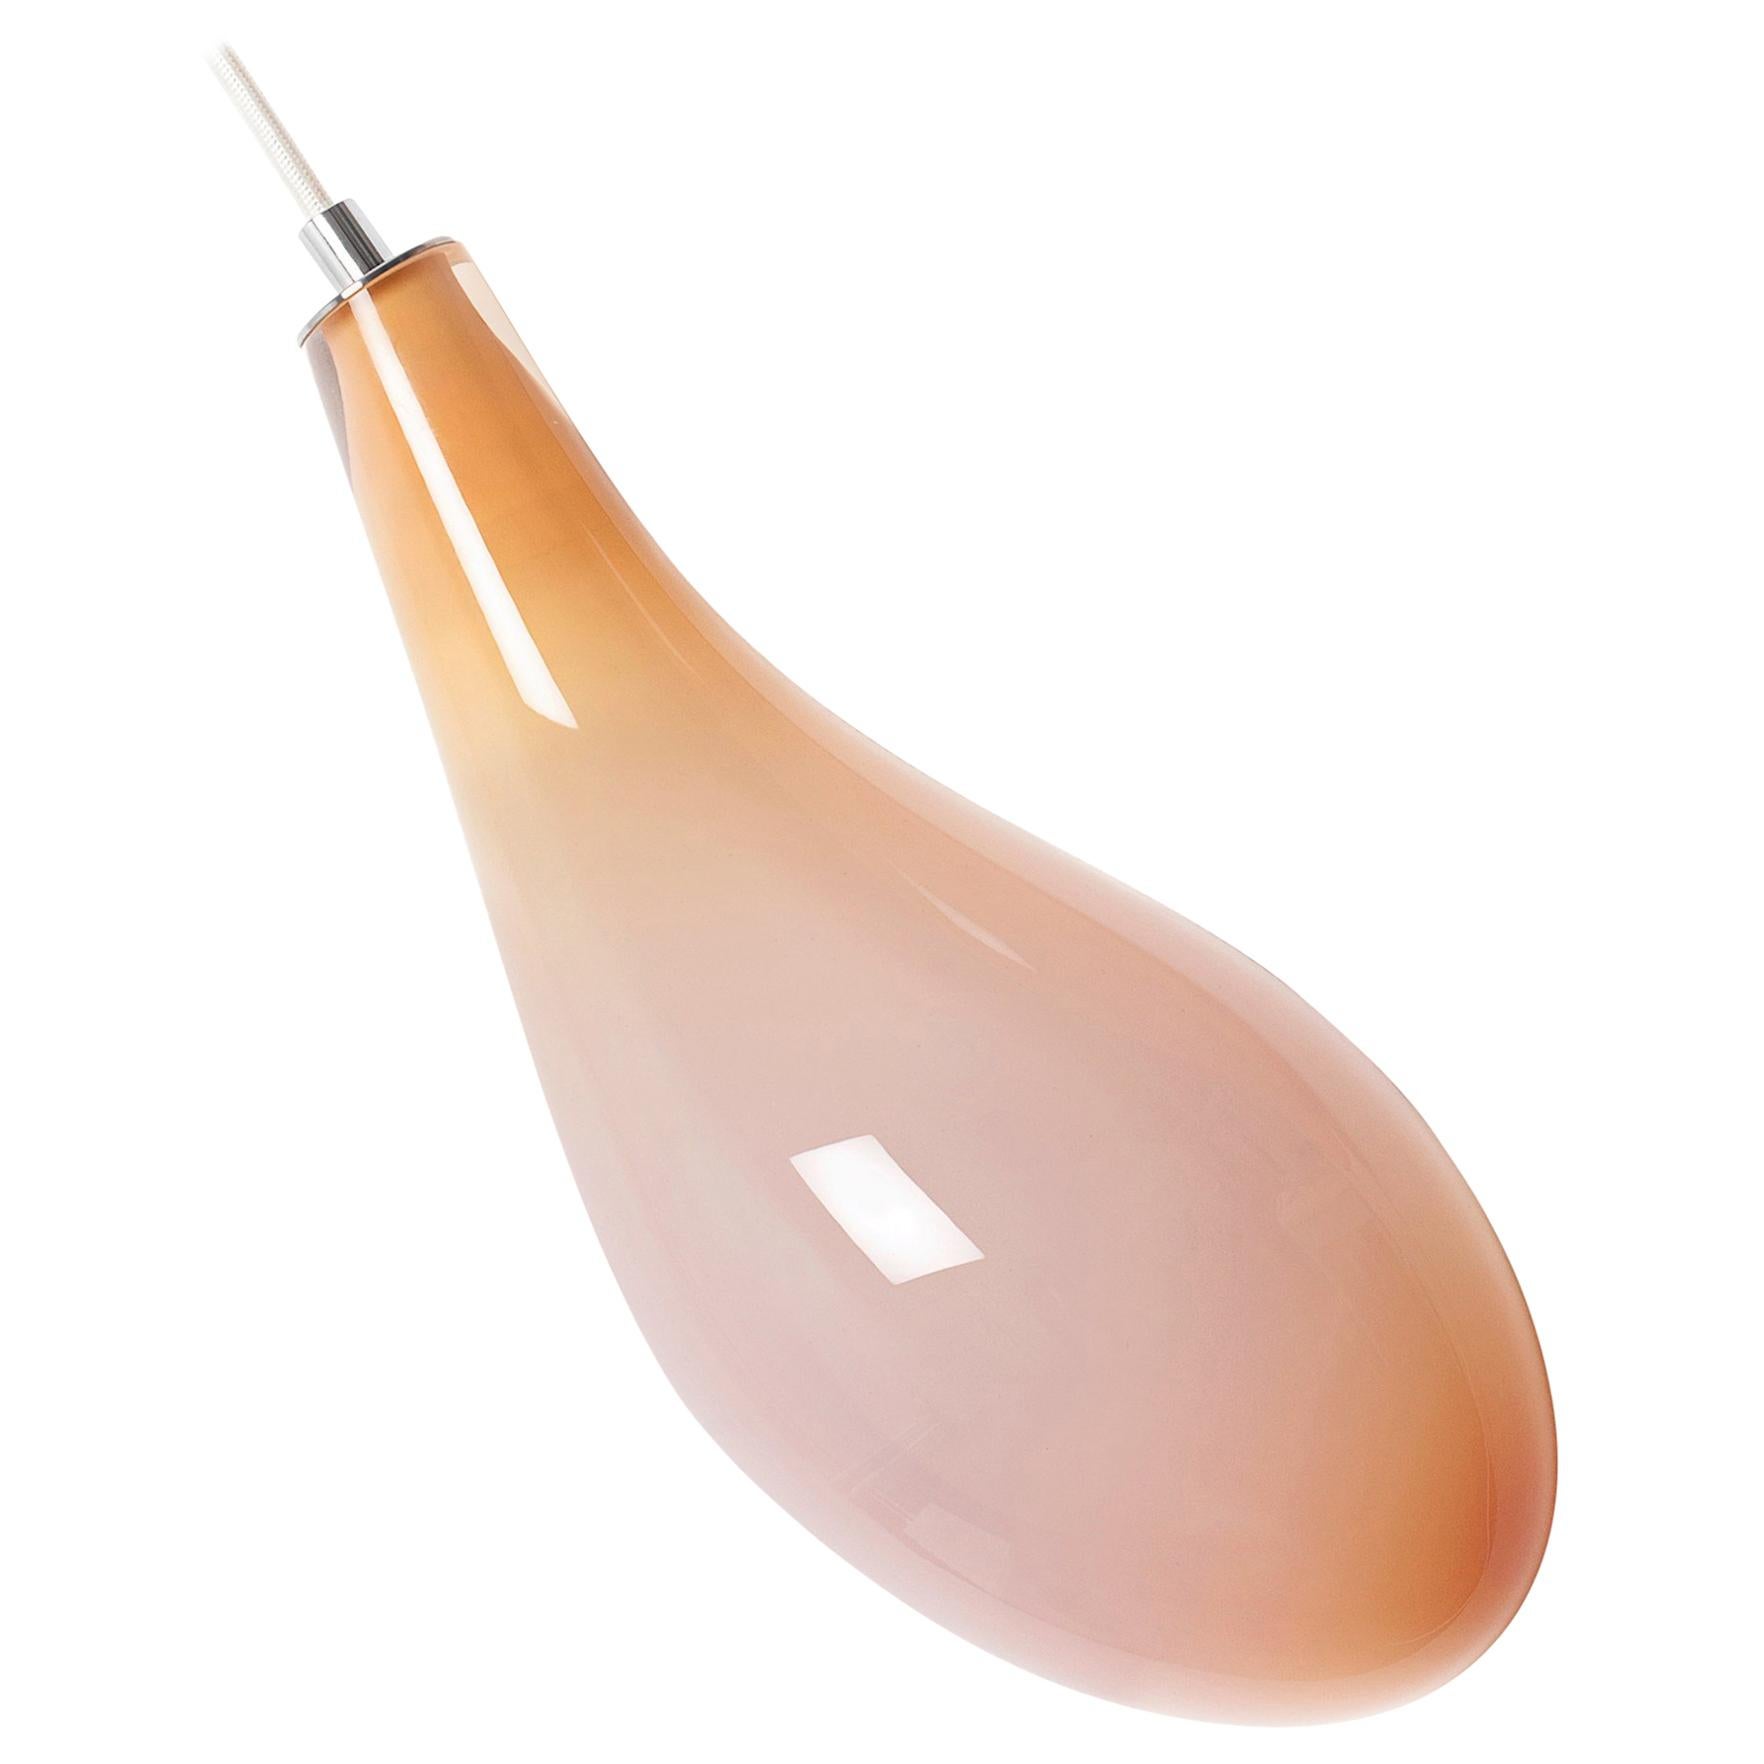 Mouth Blown Glass Lamp in Orange, Leech by Stoft, 2017 For Sale